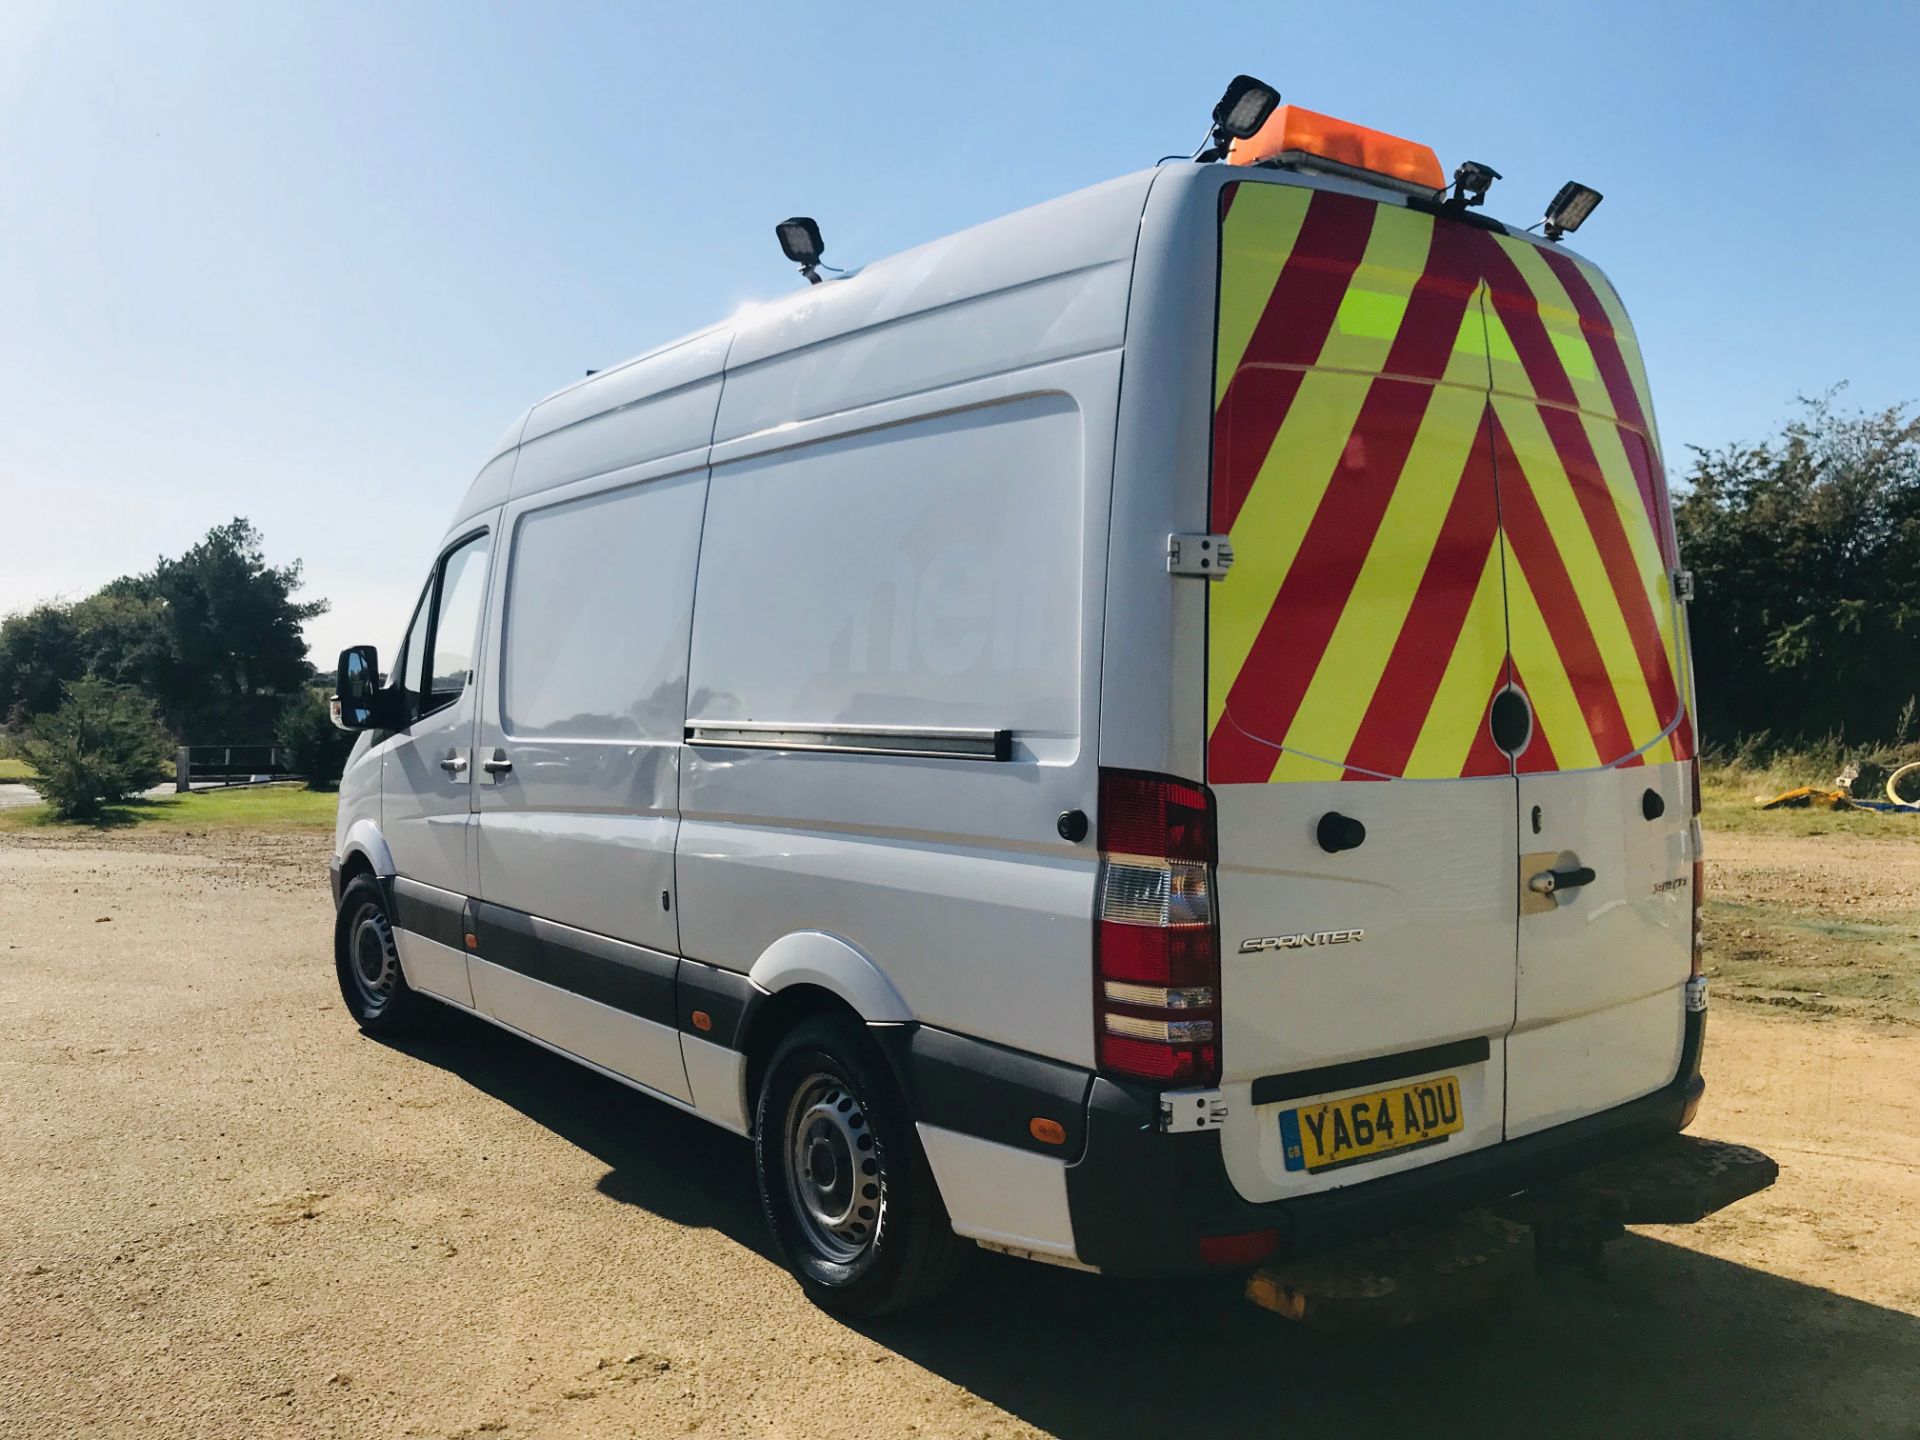 MERCEDES-BENZ SPRINTER 313 CDI *MWB HI-ROOF -WELFARE / MESSING UNIT* (FULLY EQUIPT) 1 OWNER FROM NEW